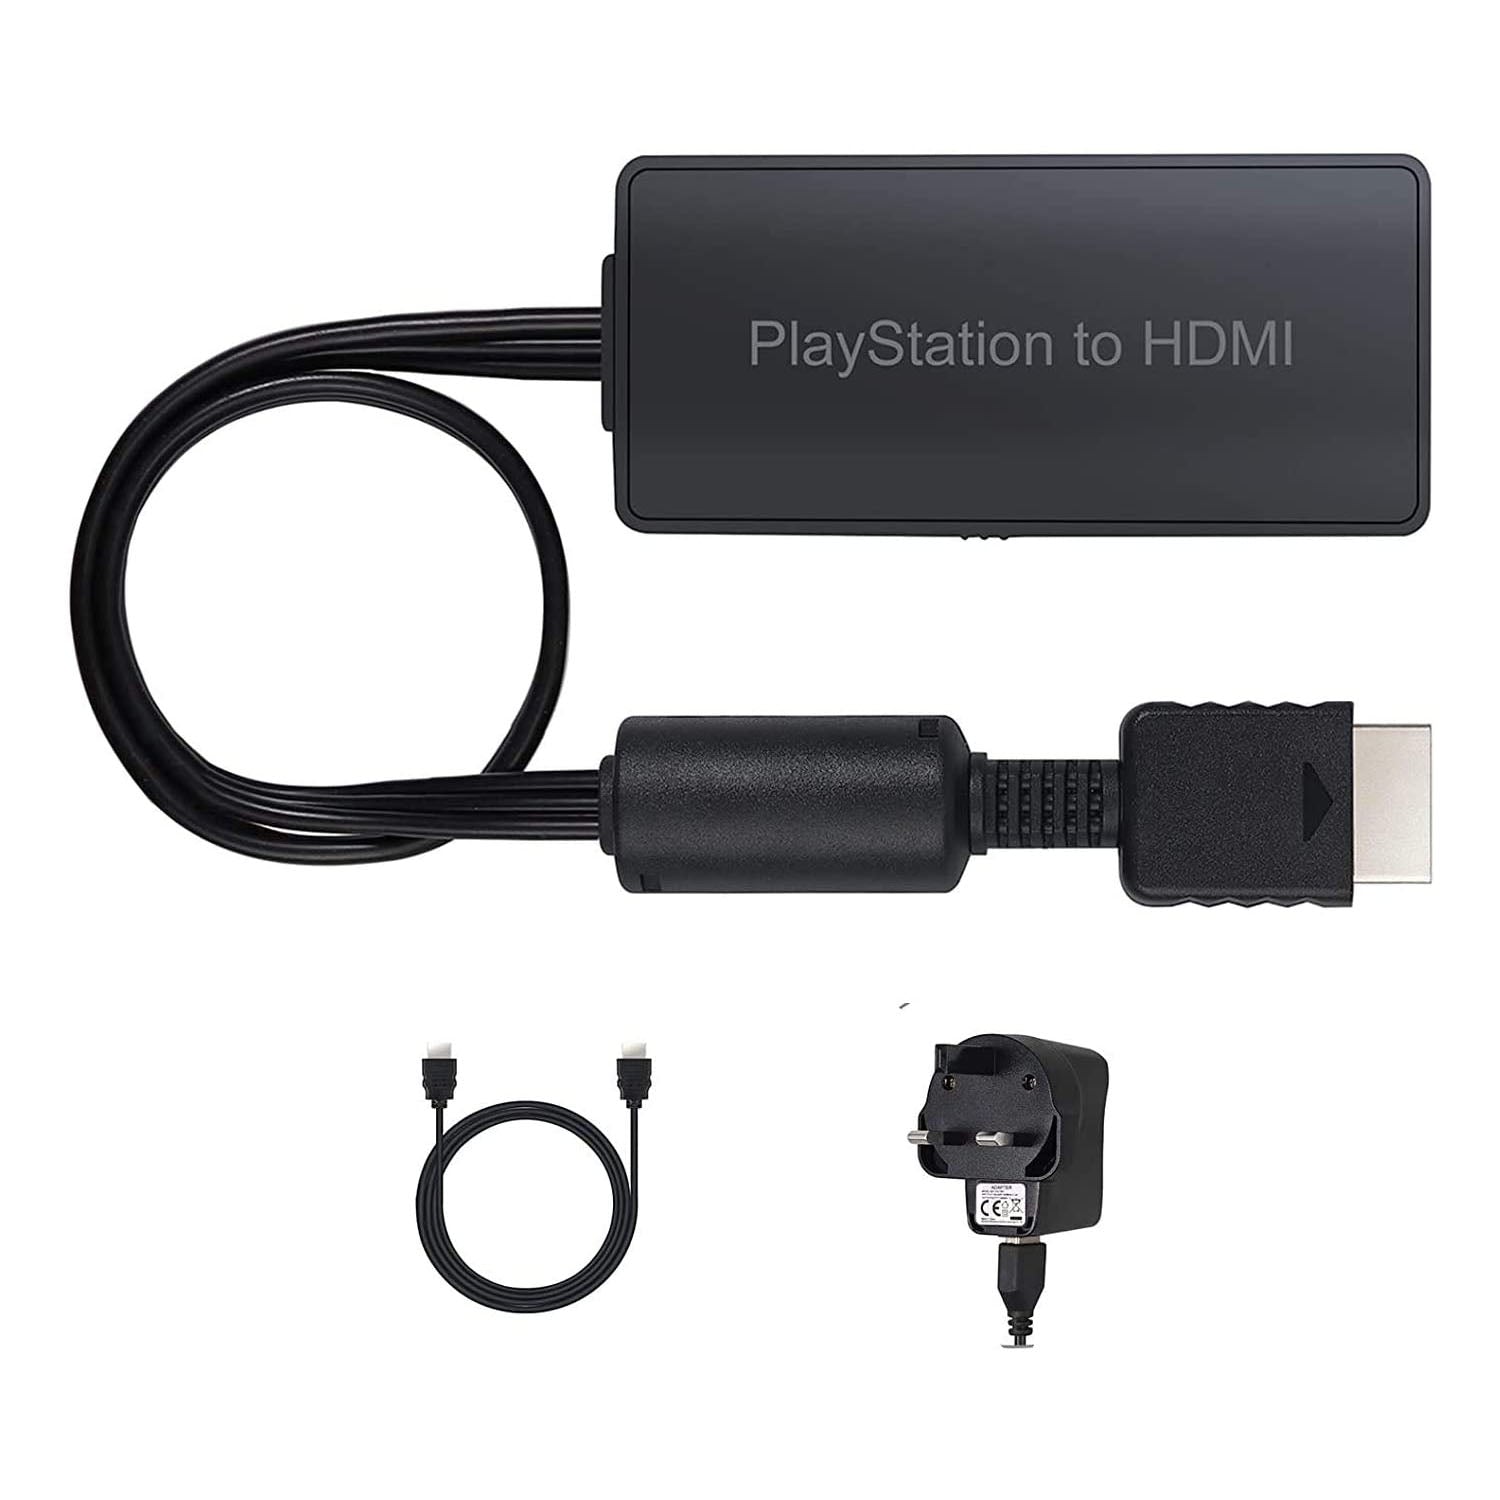 PlayStation HDMI Converter with HDMI Cable LiNKFOR Store